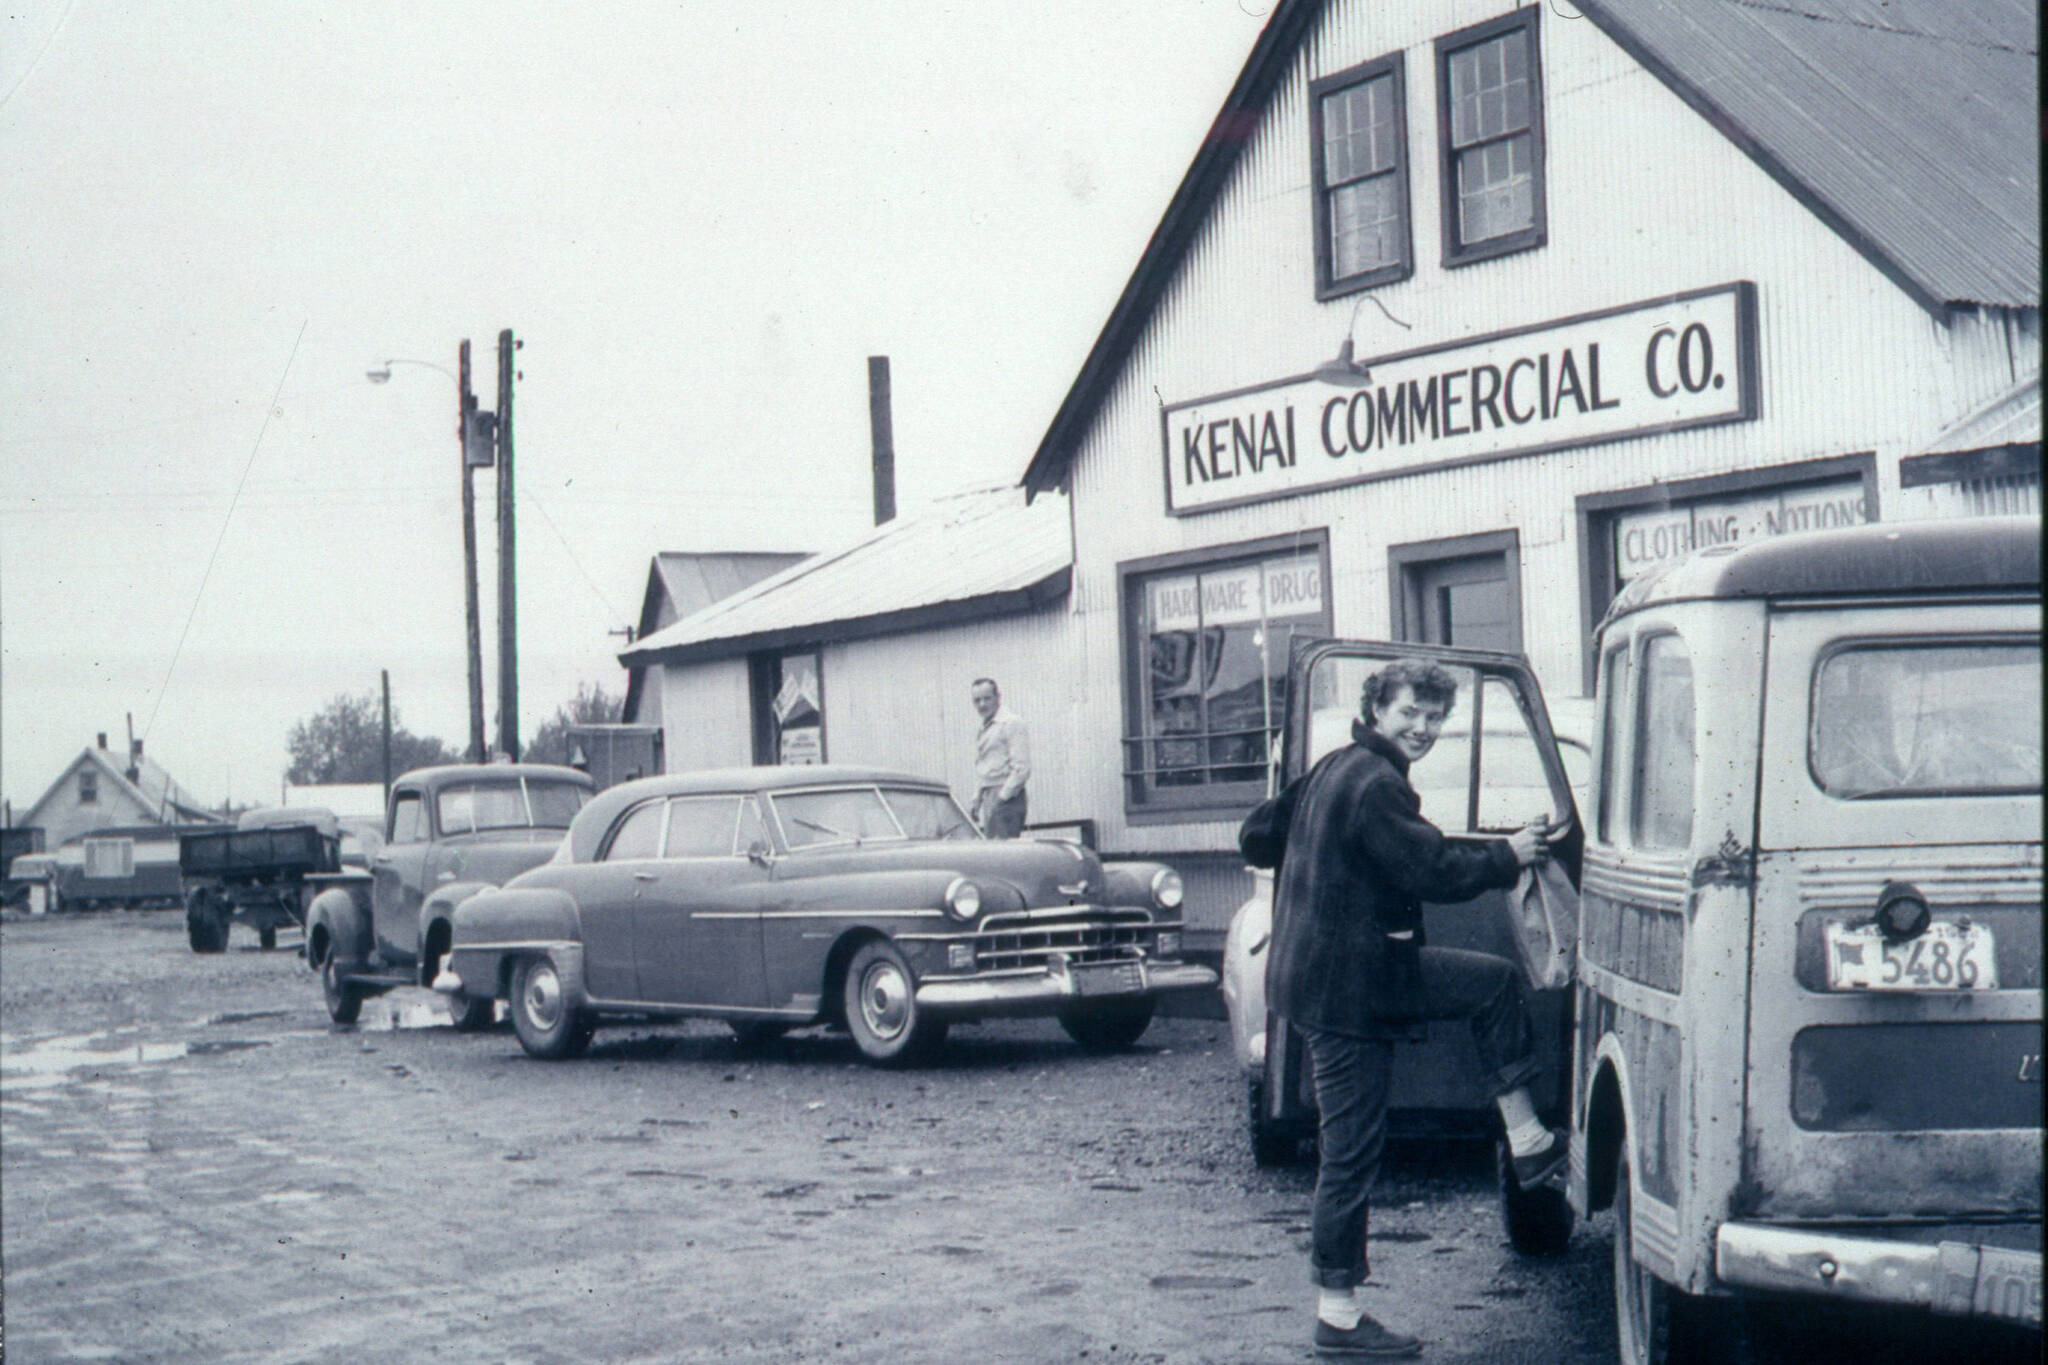 Better Homes & Gardens article photo, 1955 
Rusty Lancashire, who befriended her neighbor, Miriam Mathers, climbs into her vehicle in front of the Kenai Commercial Company store in Kenai.